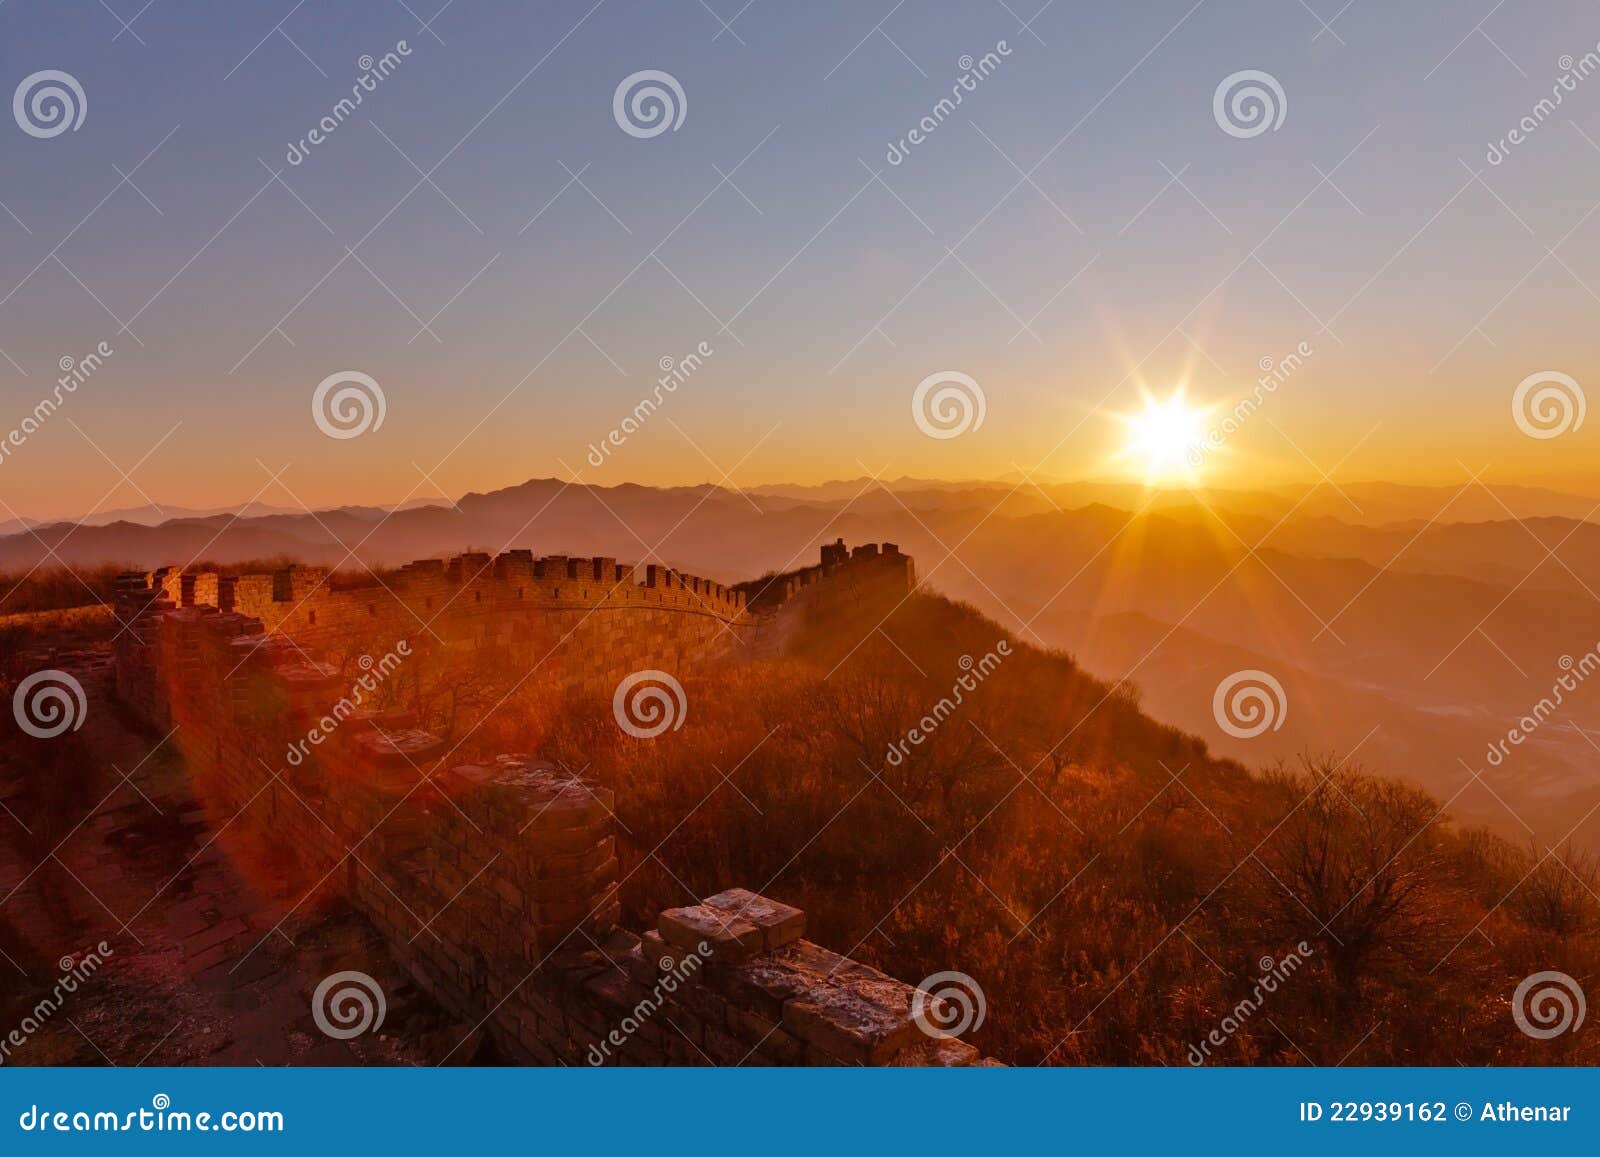 badaling great wall in sunset